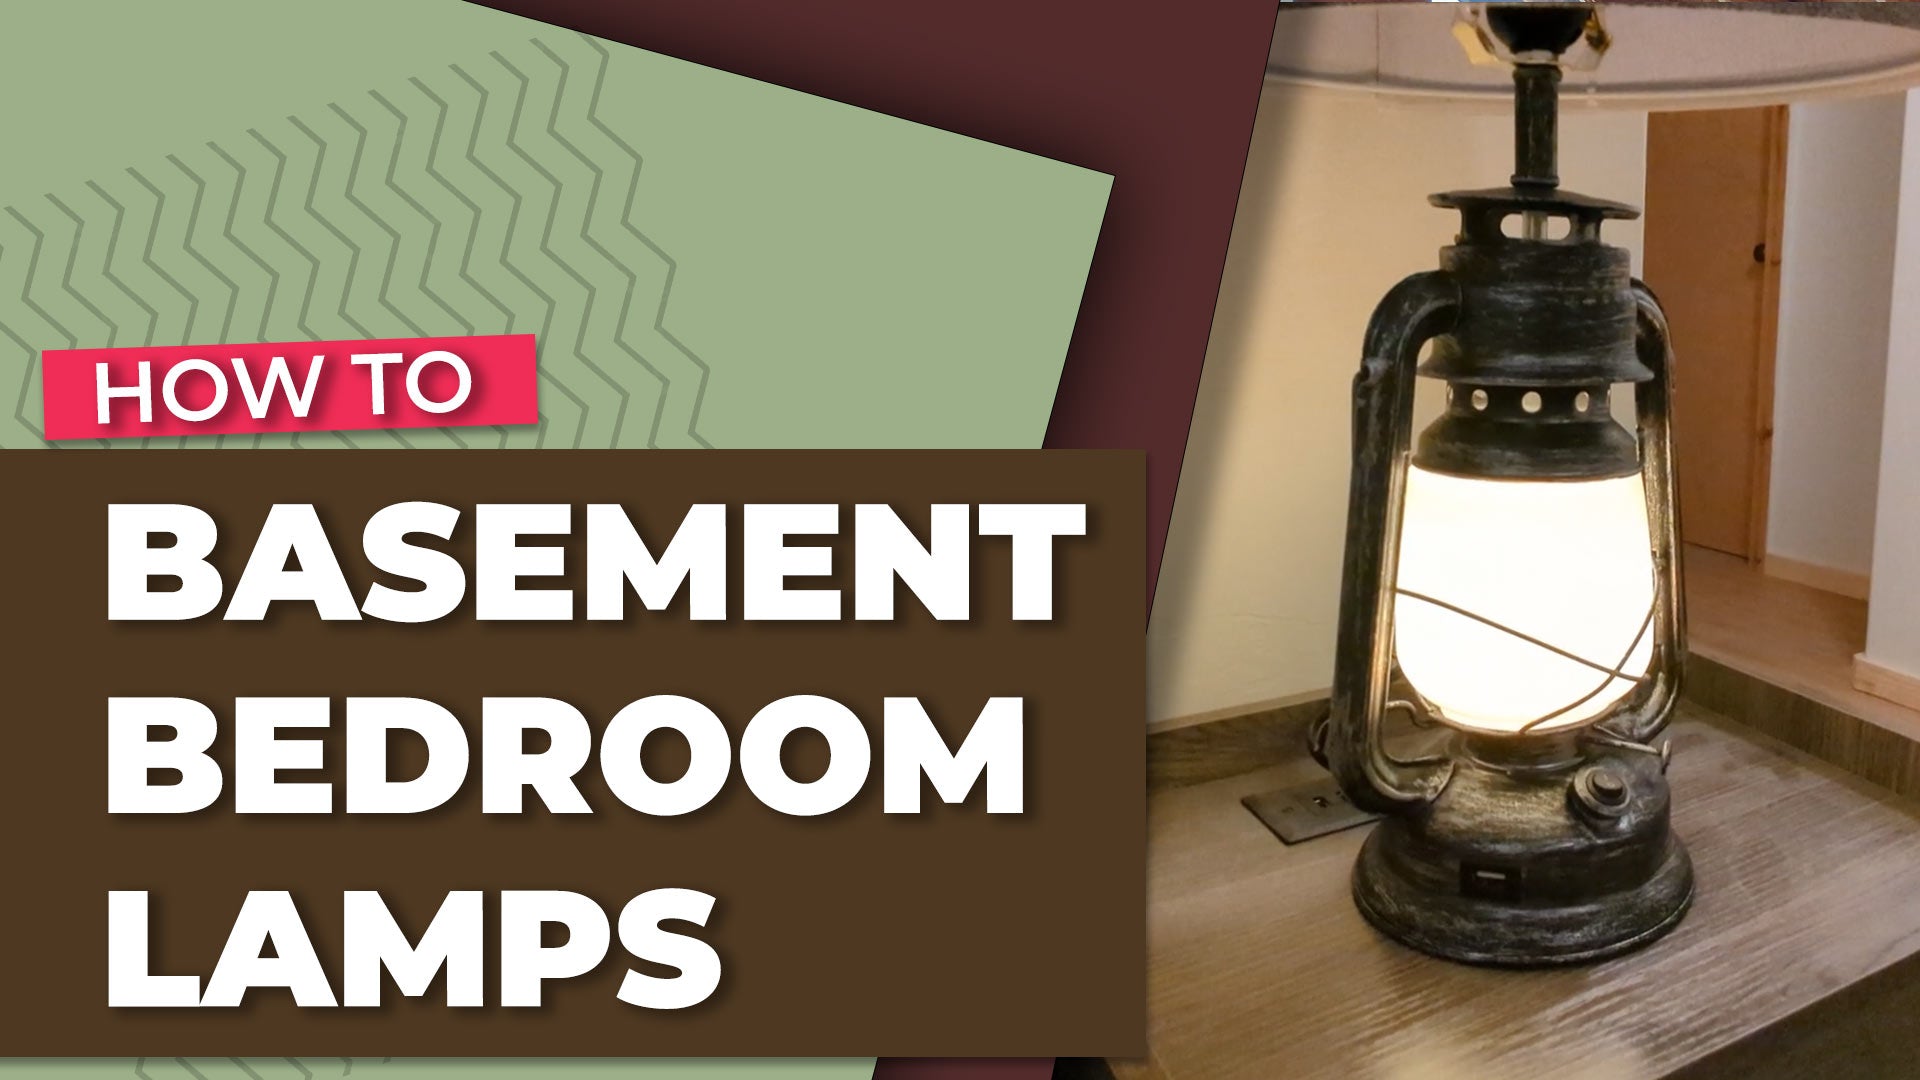 How to Use the Lamps in the Basement Bedroom